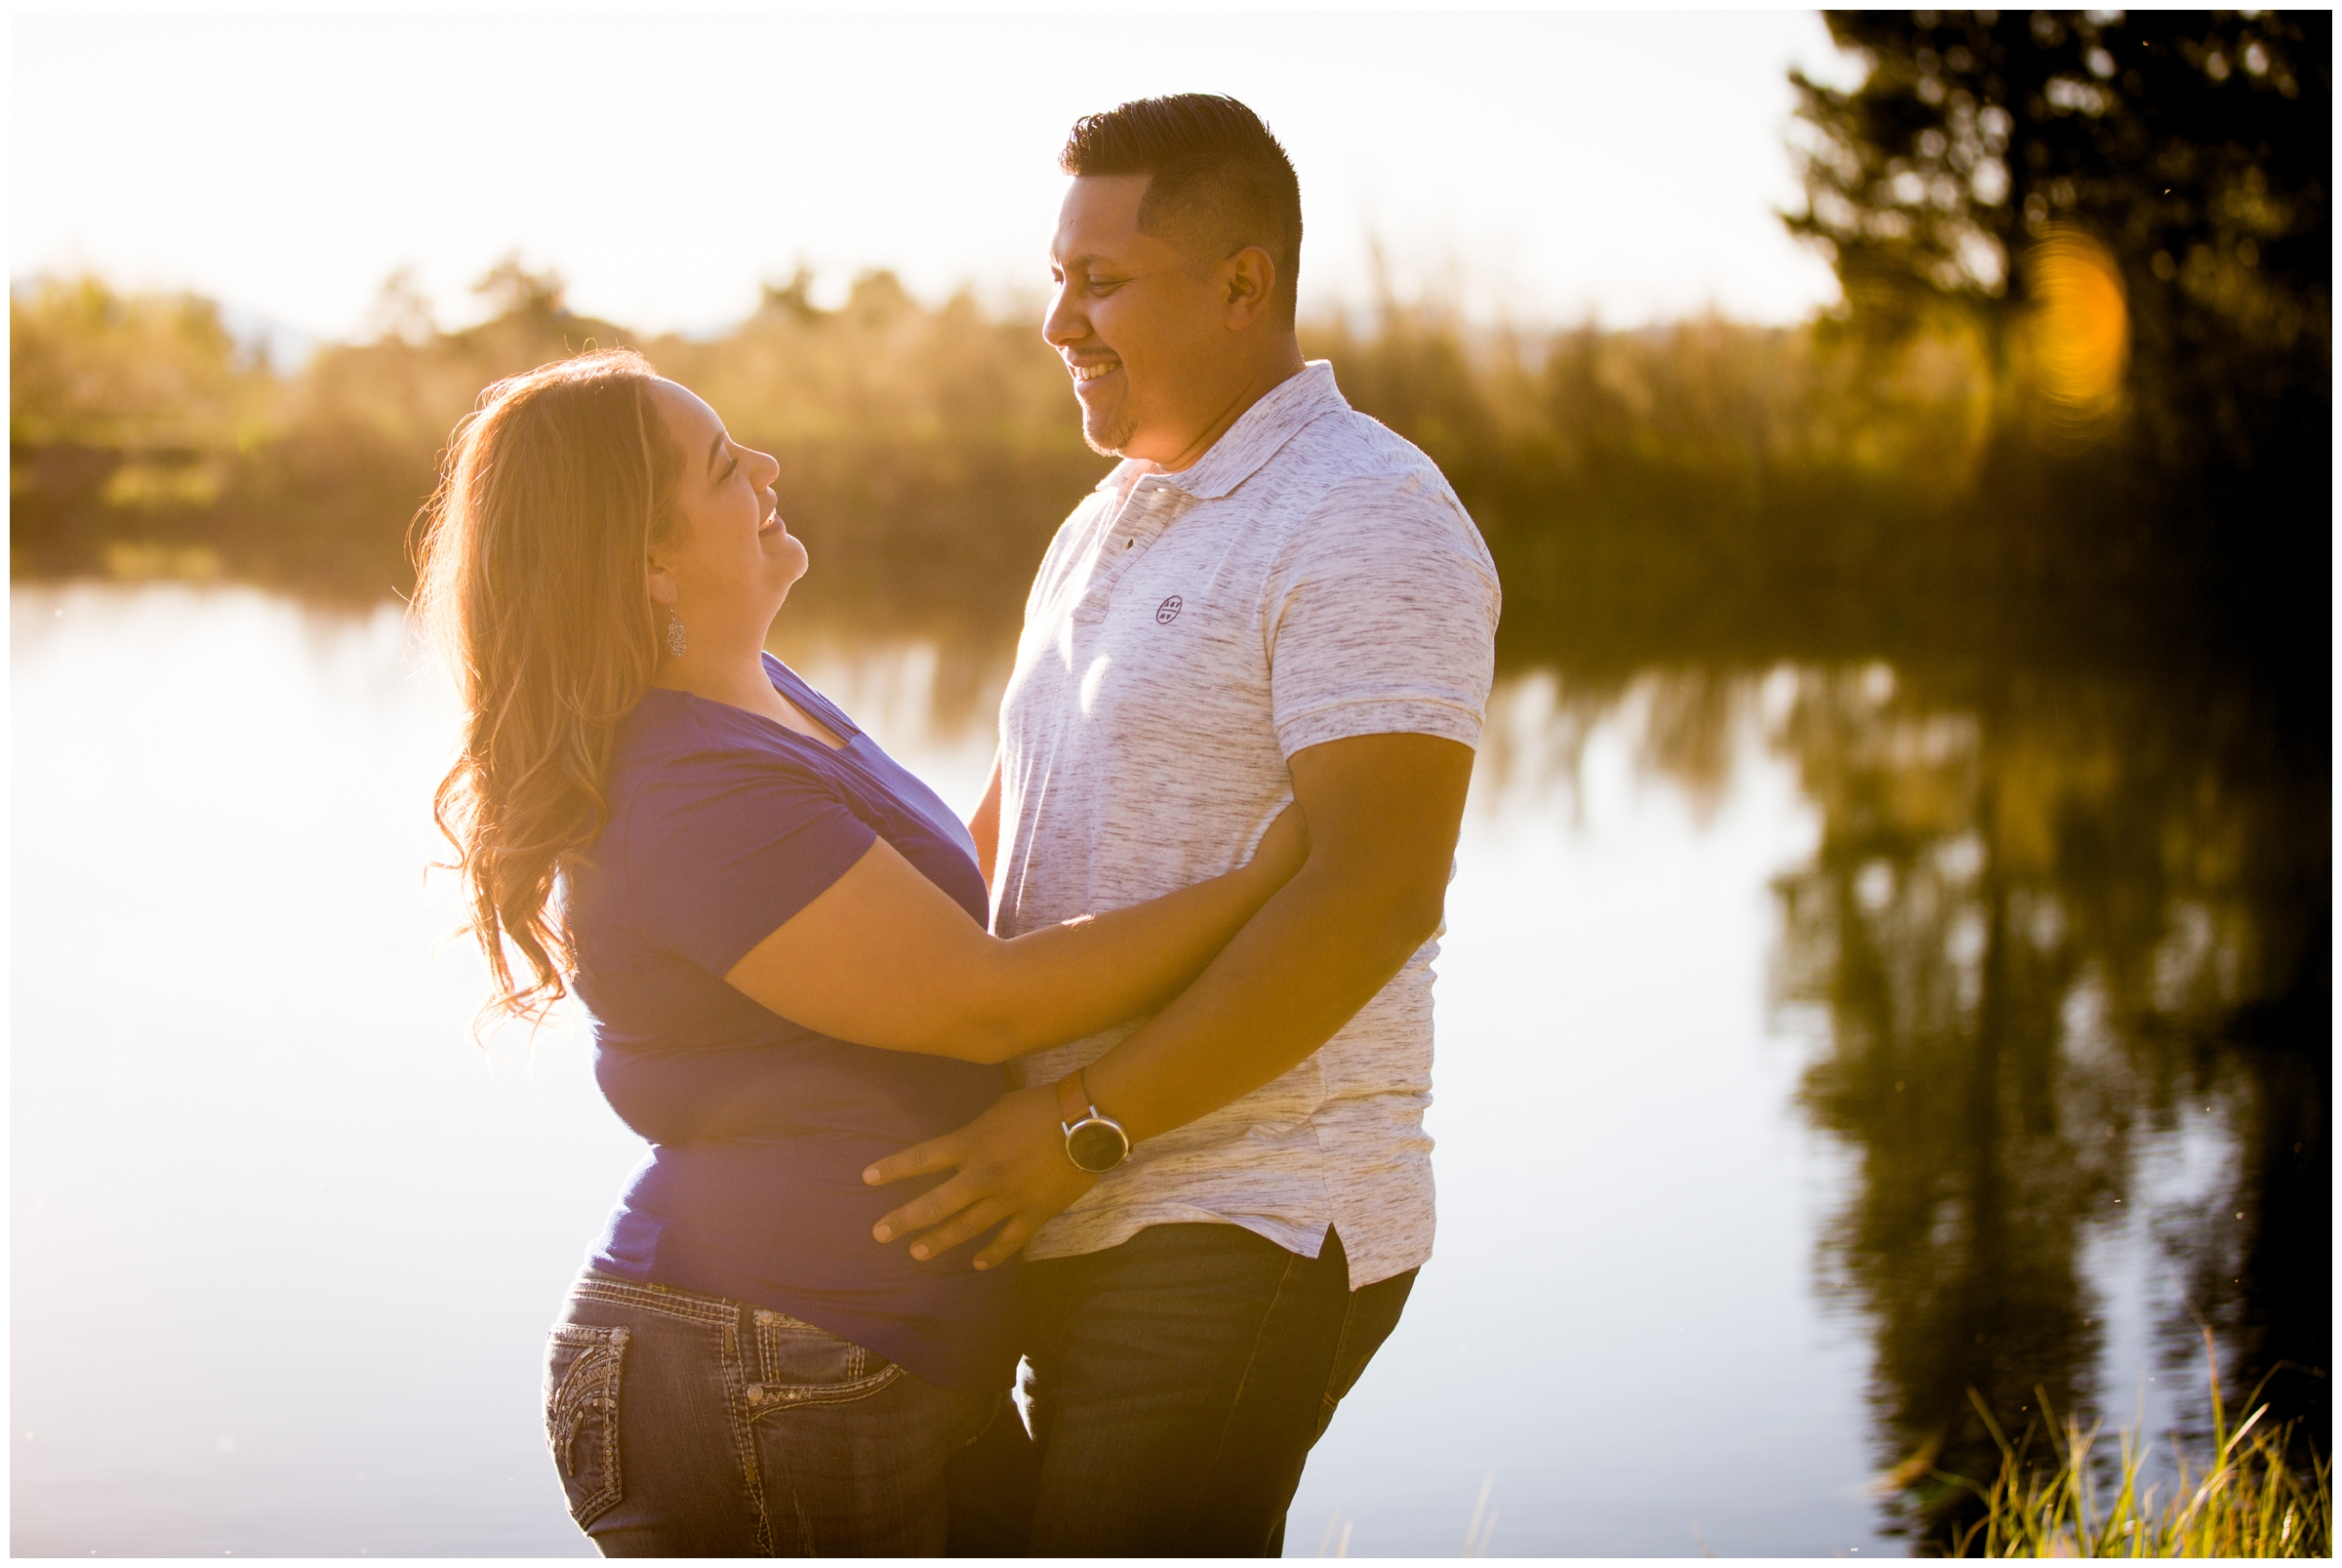 sunny golden hour engagement photography inspiration in Winter Park Colorado 